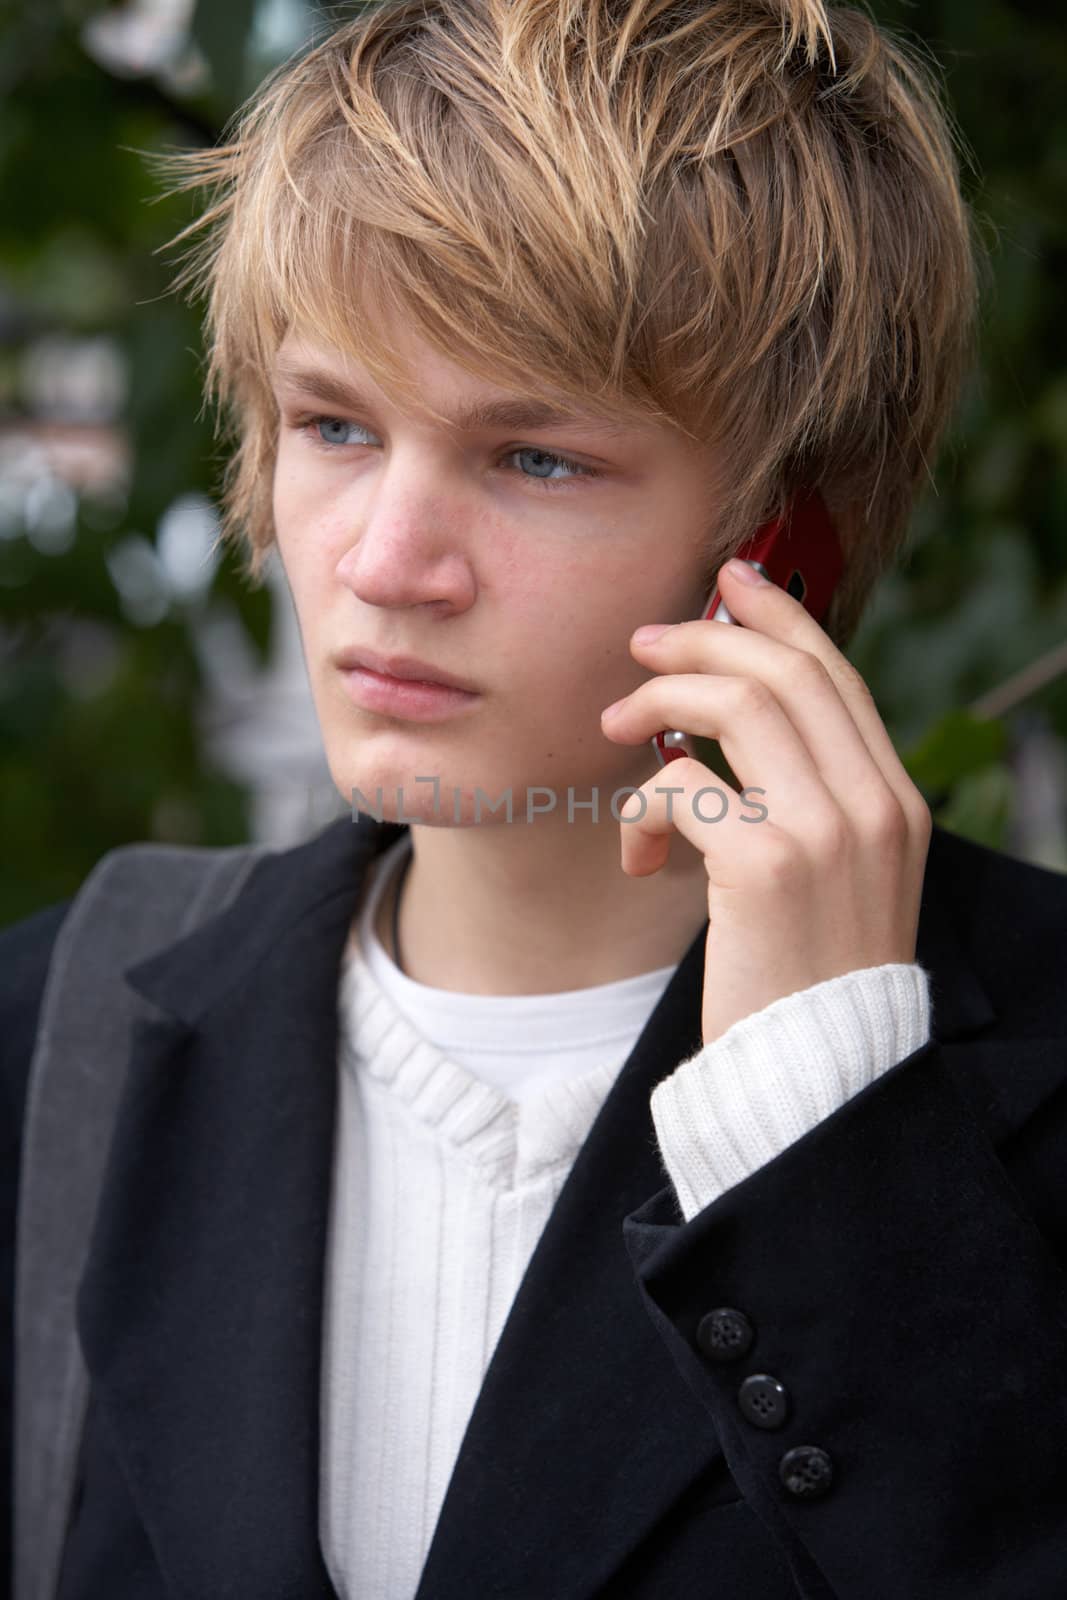 Teenage boy using mobile phone in city park, close-up